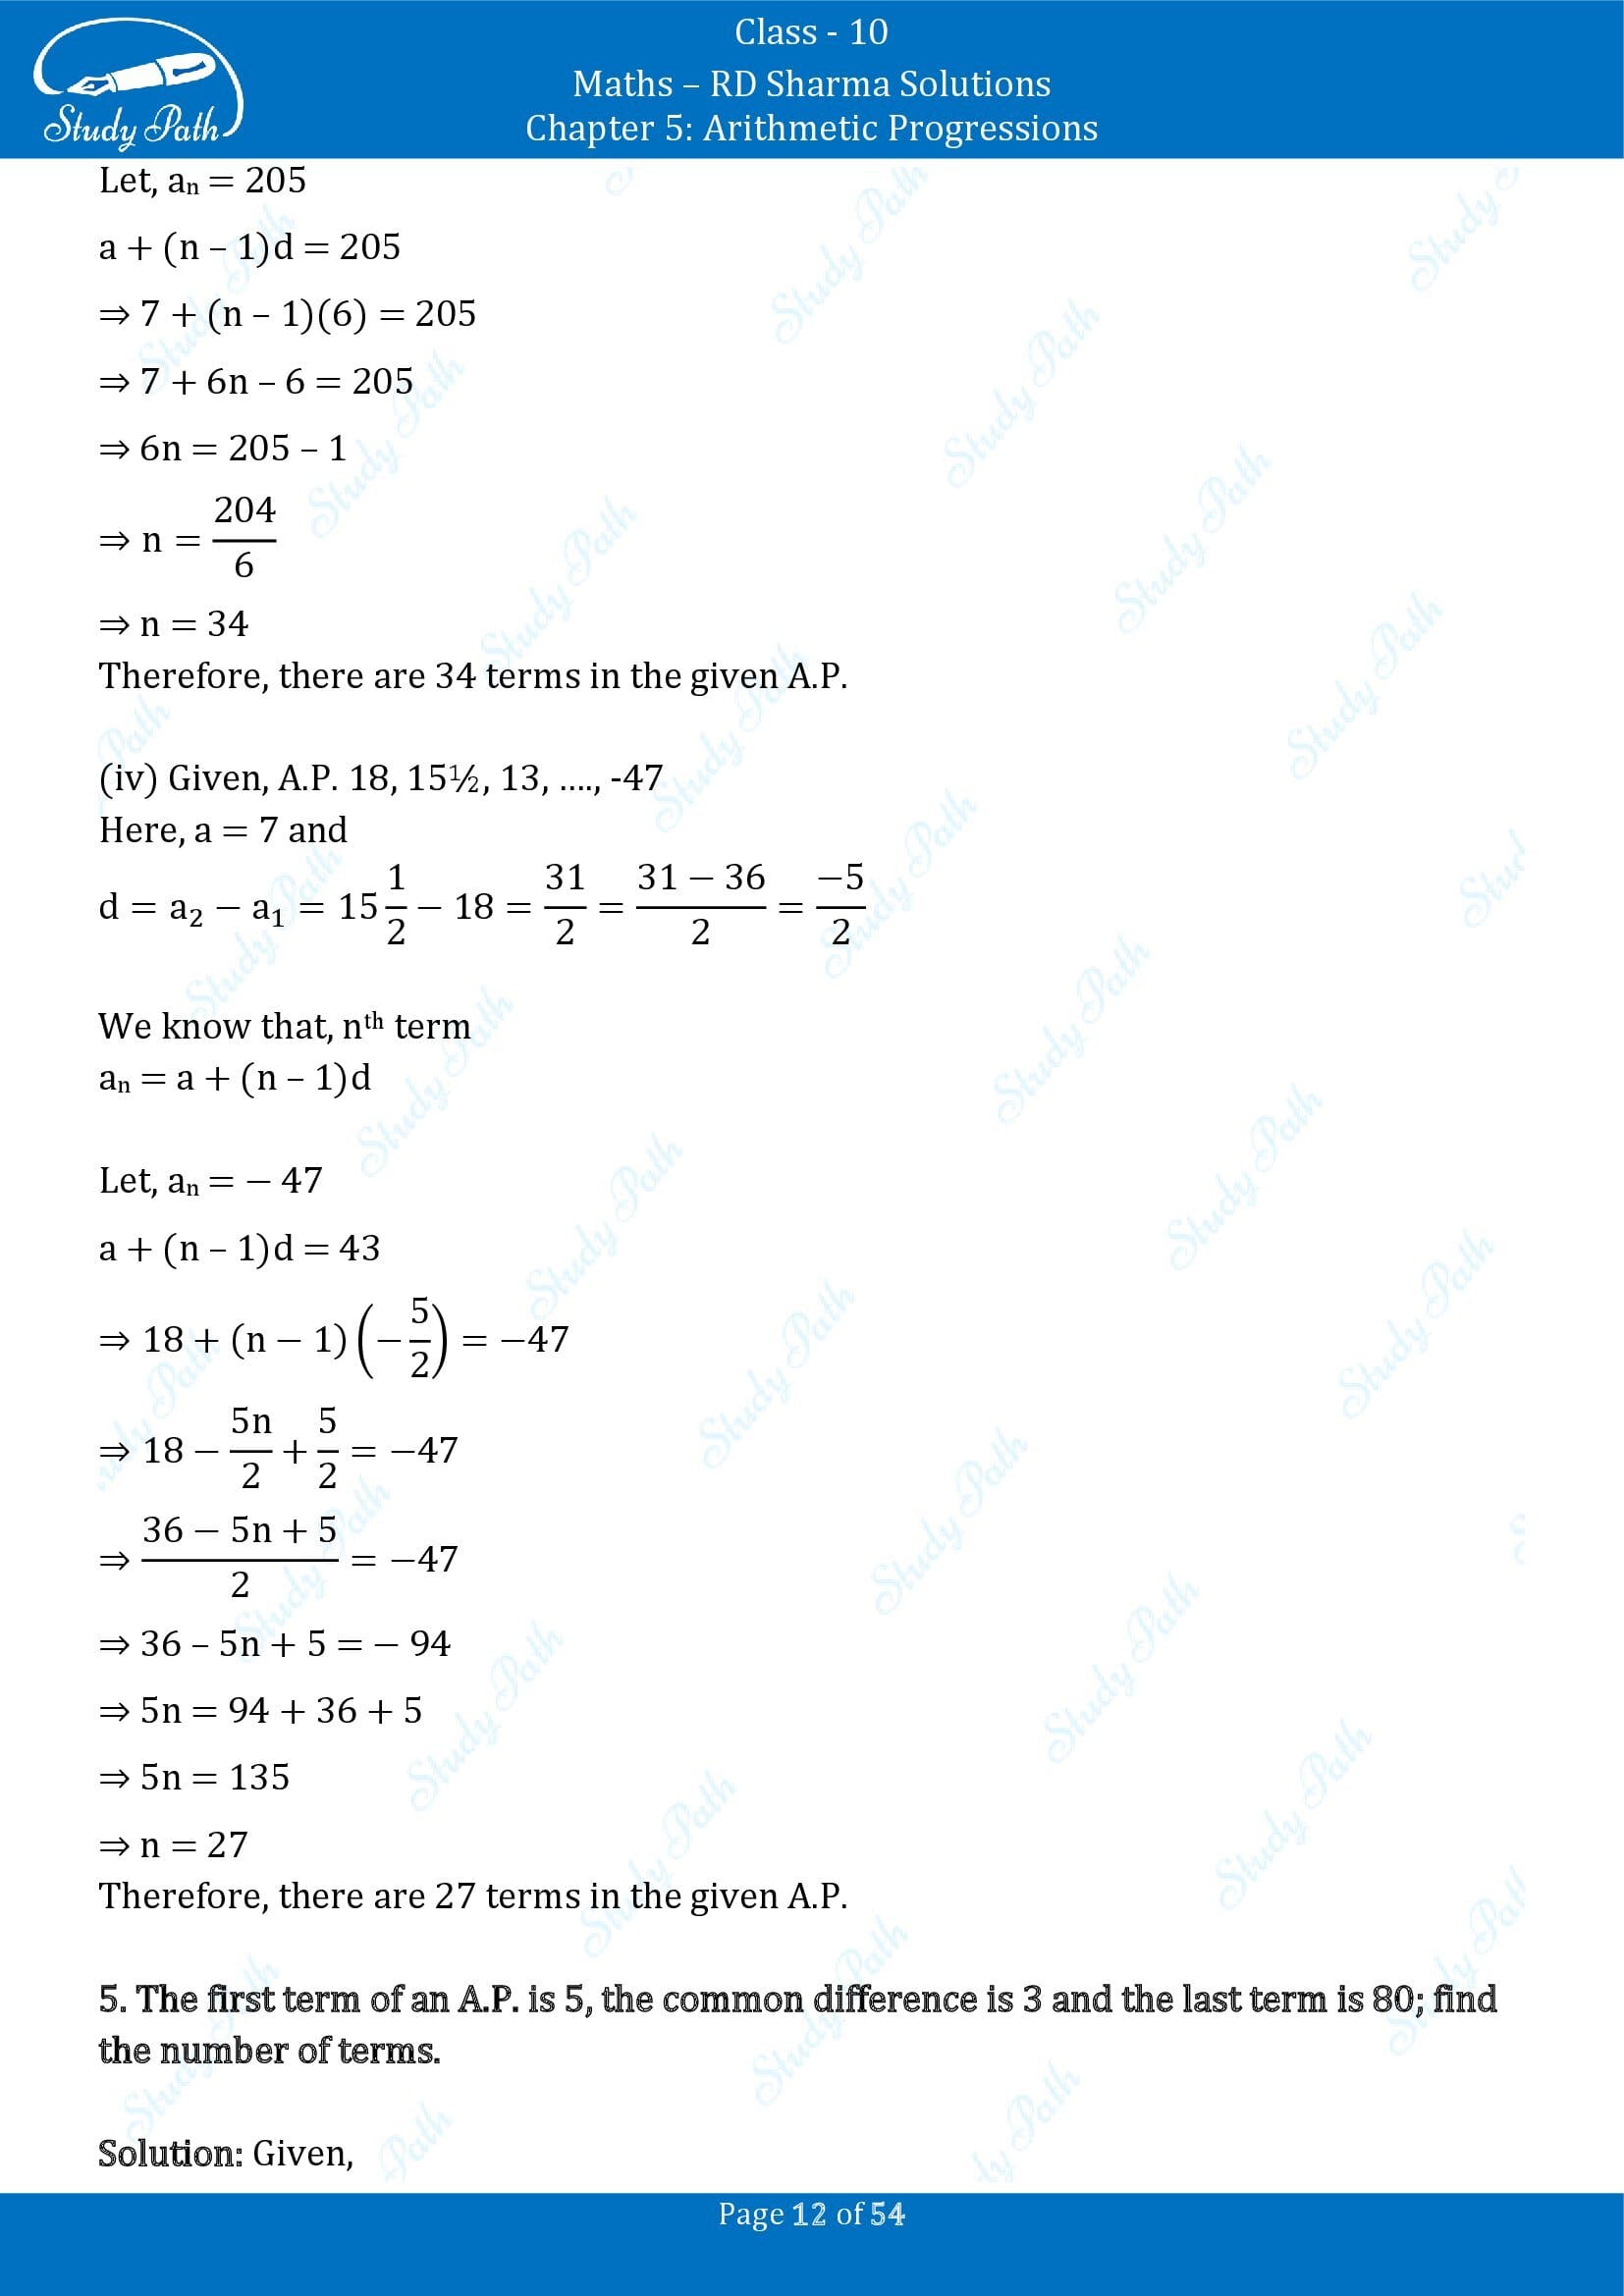 RD Sharma Solutions Class 10 Chapter 5 Arithmetic Progressions Exercise 5.4 00012